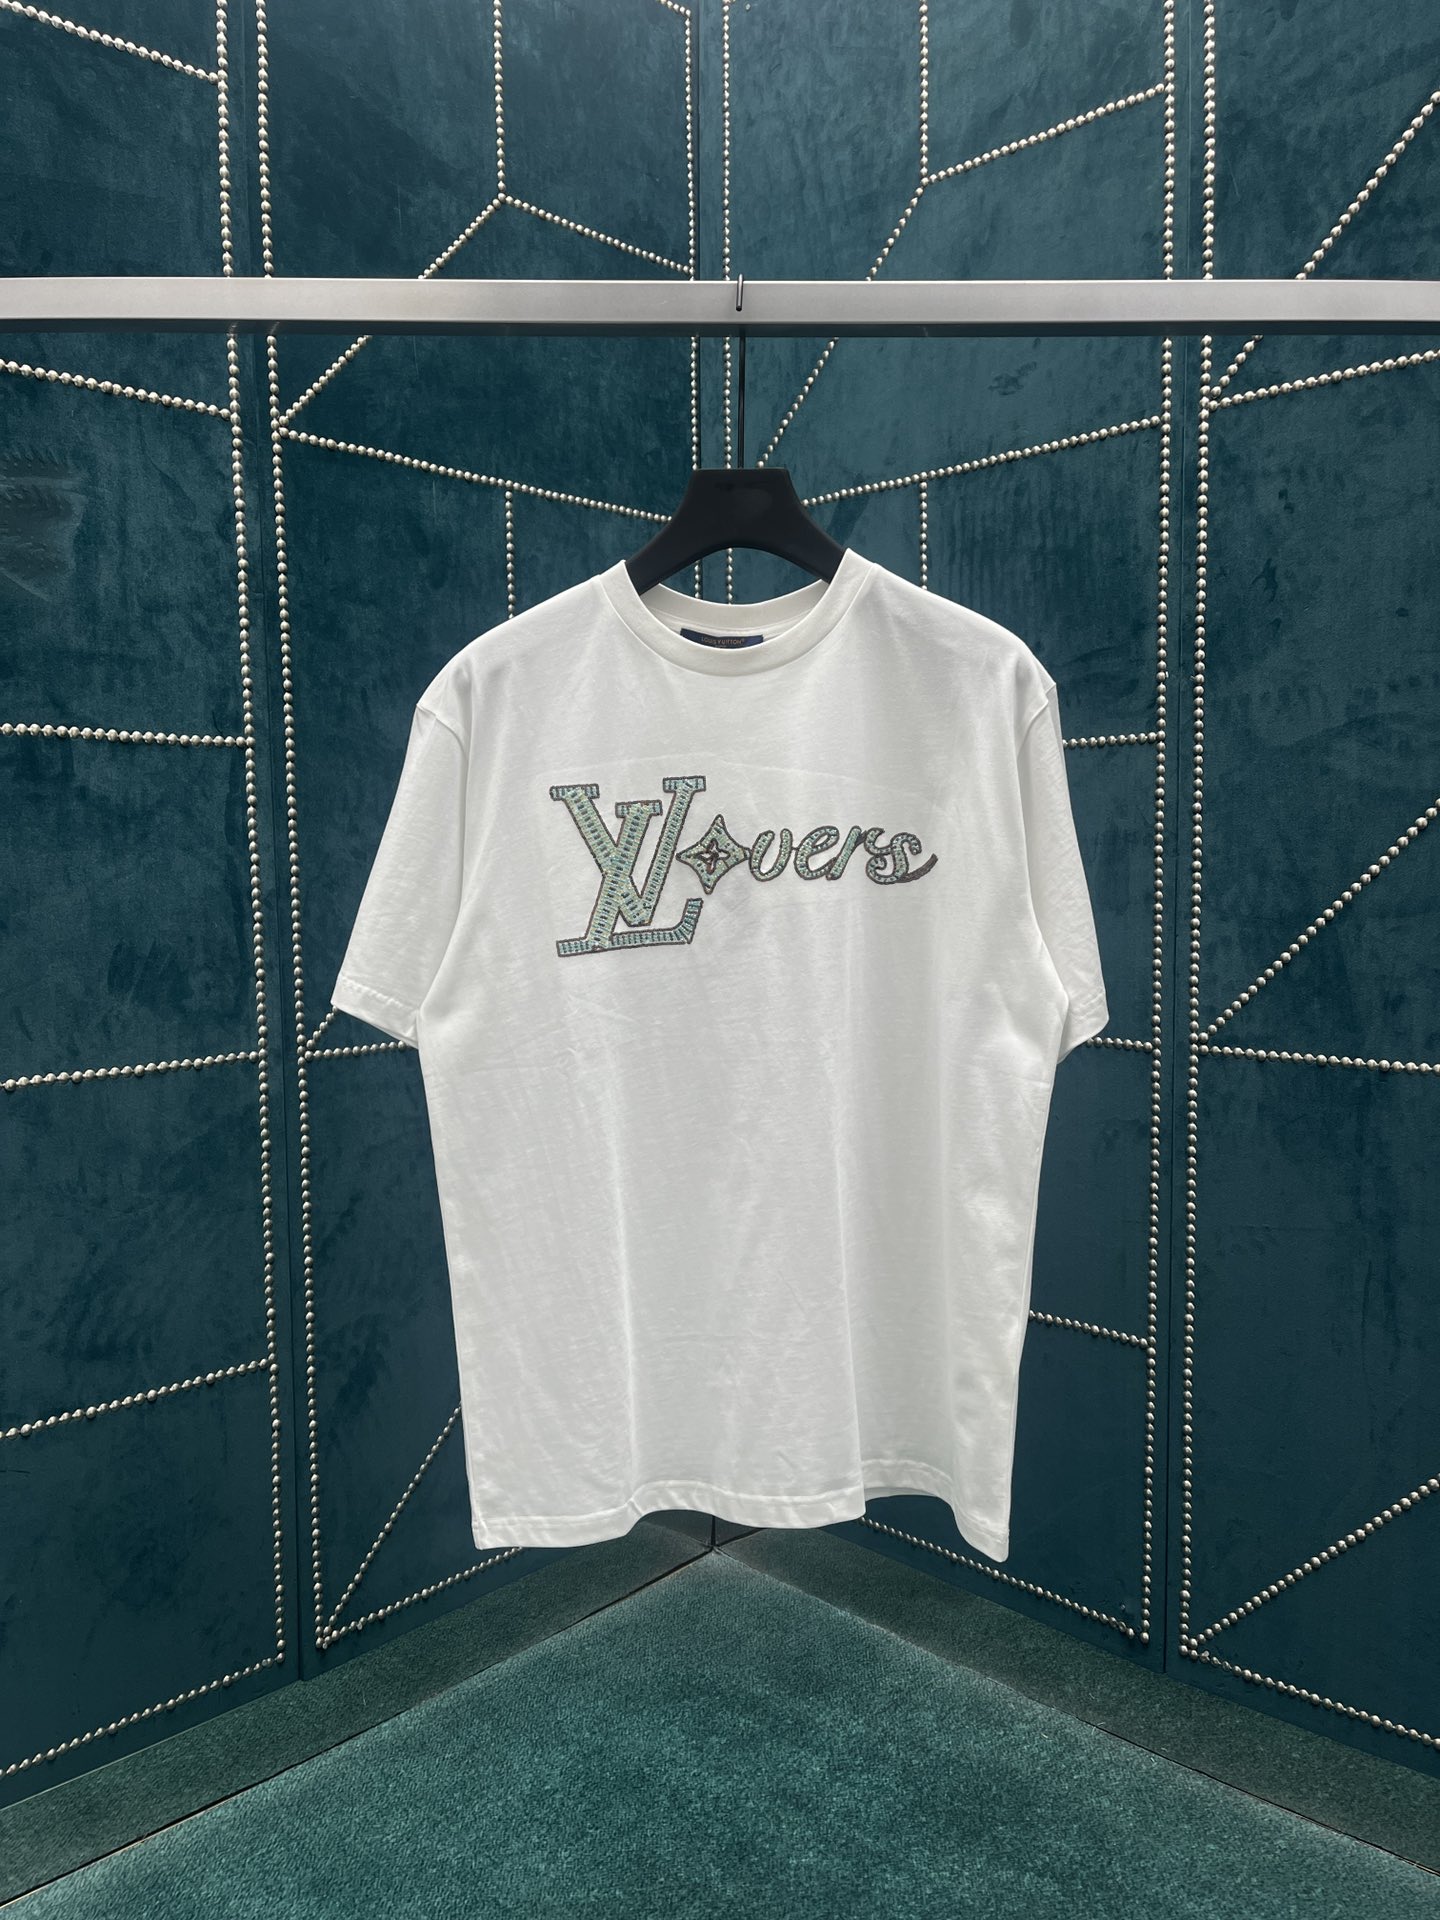 Louis Vuitton Clothing T-Shirt Embroidery Unisex Cotton Spring/Summer Collection